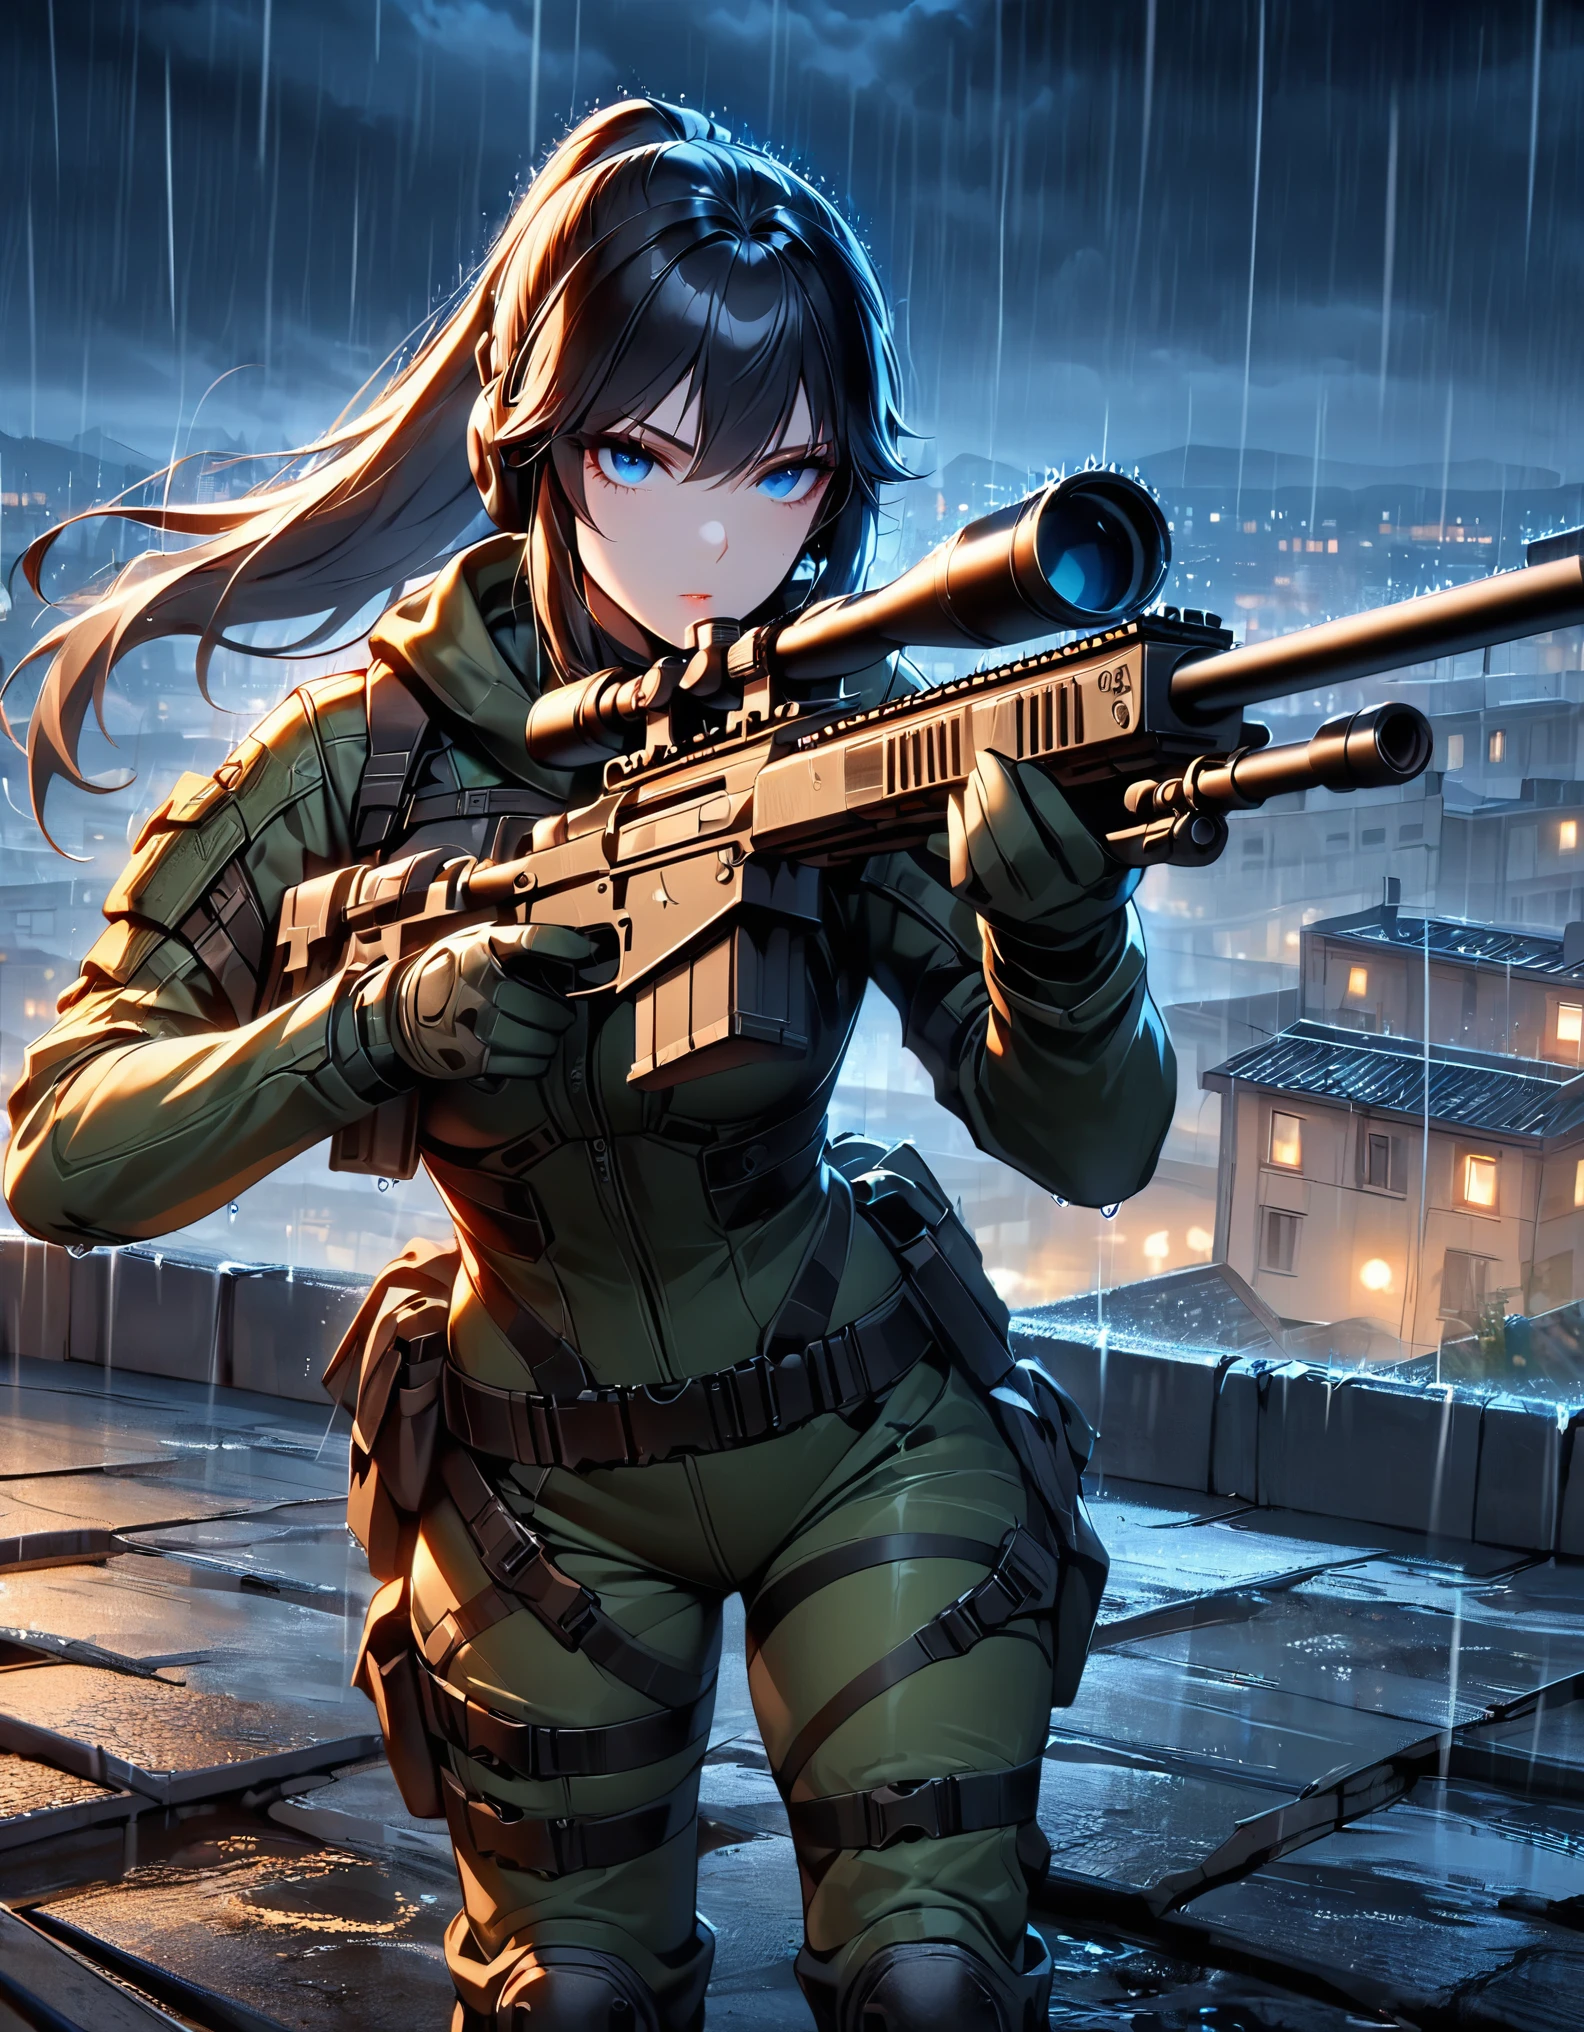 masterpiece, best quality, semi-realistic, 1girl, assassin, age 24, mature lady, black hair, long hair, ponytail, blue eyes, tall woman, holding and aiming a sniper rifle with suppressor and scope, tactical headset, rain, eastern european backdrop, night, rooftop, dark brooding atmosphere, green bodysuit, combat boots, calm and calculated, standing
